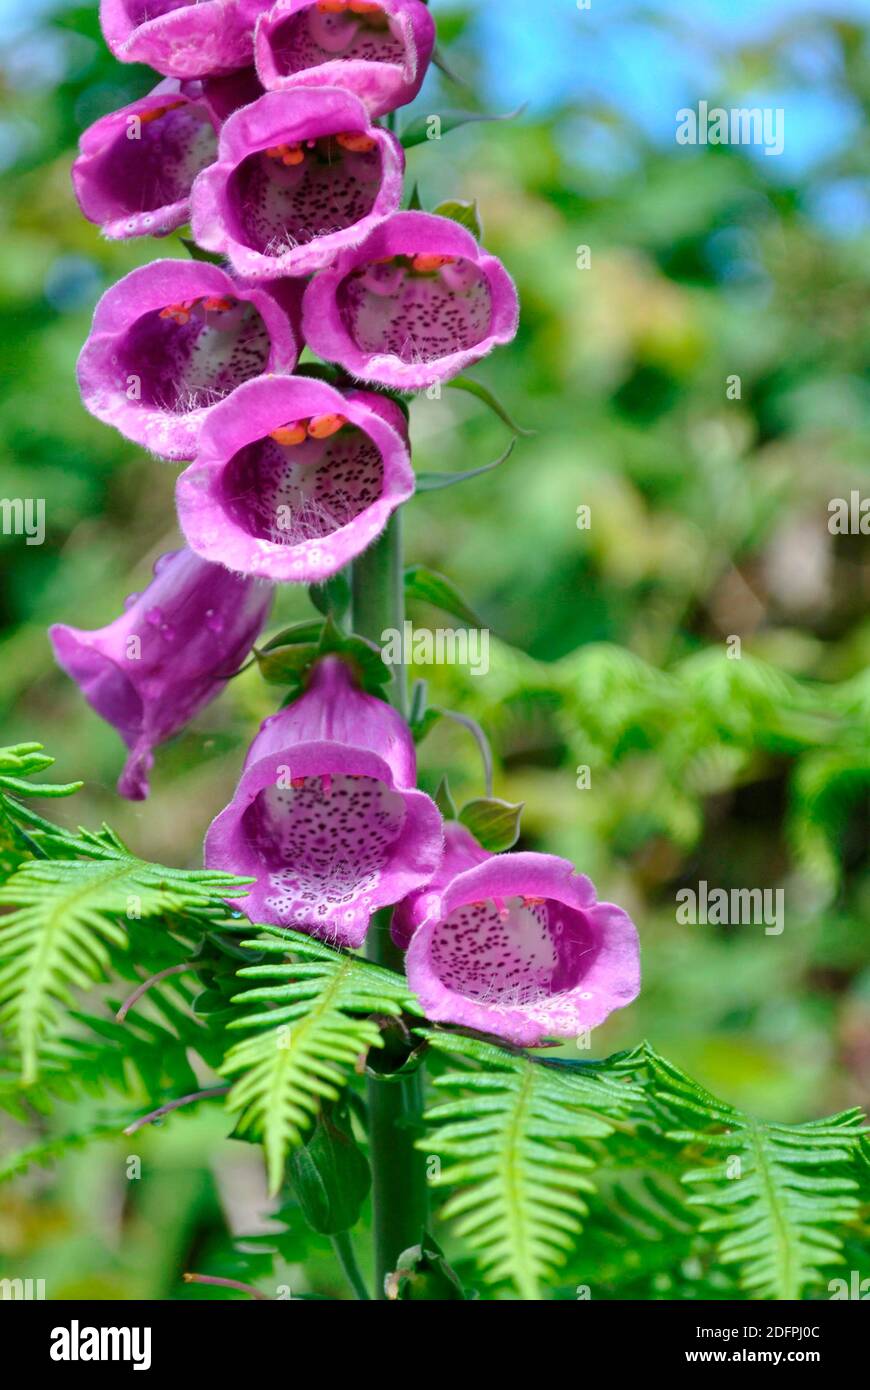 Orange Foxglove High Resolution Stock Photography and Images - Alamy